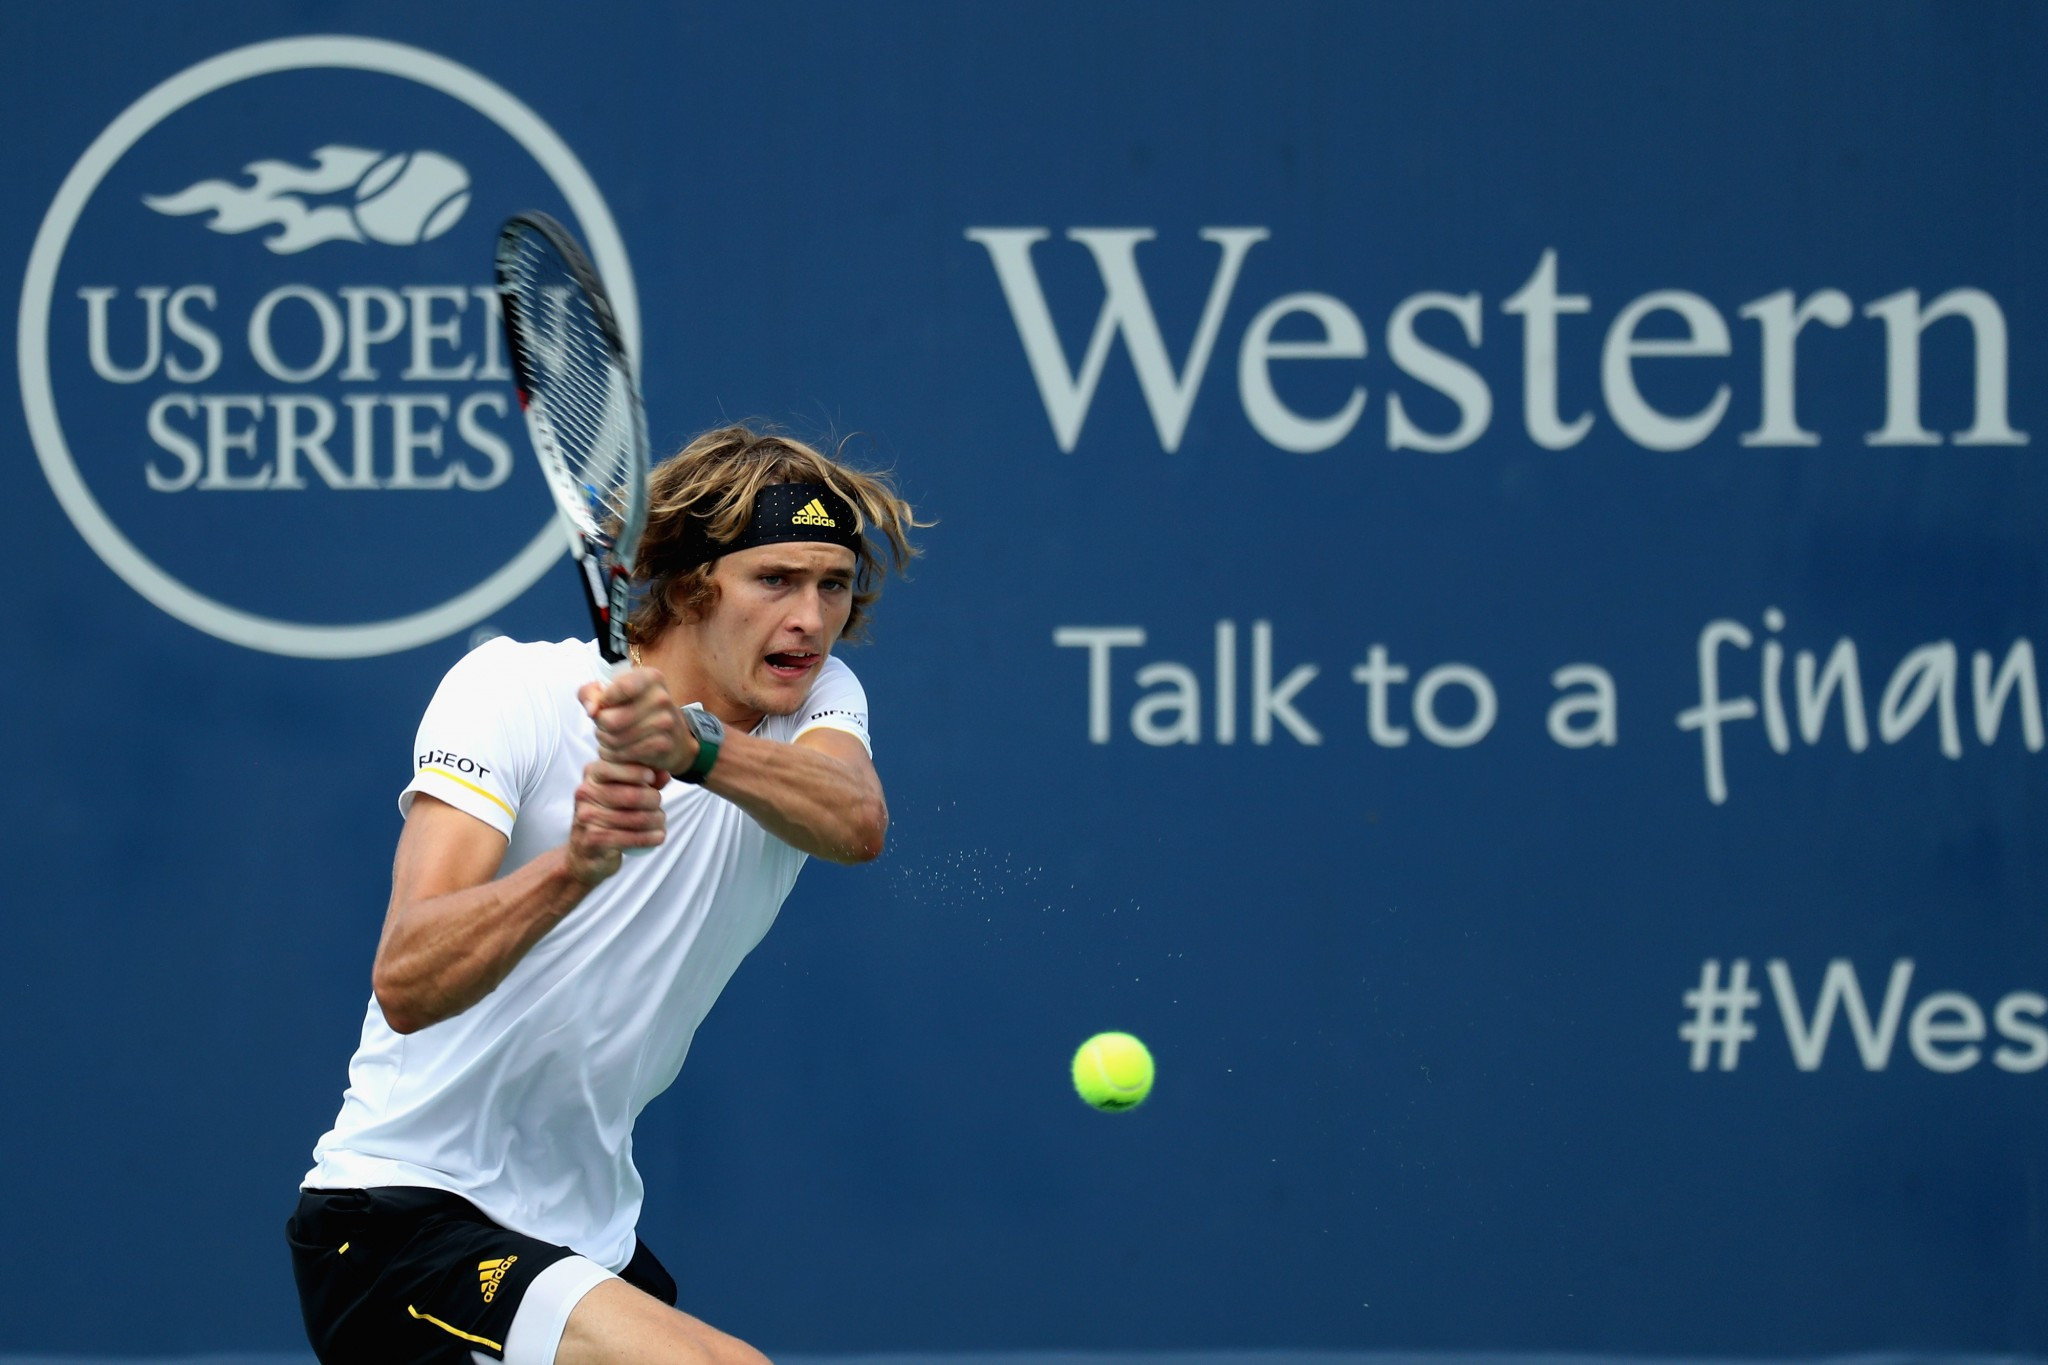 Germany's Alexander Zverev crashed out of the event as he was upset by unseeded American Francis Tiafoe ©Getty Images